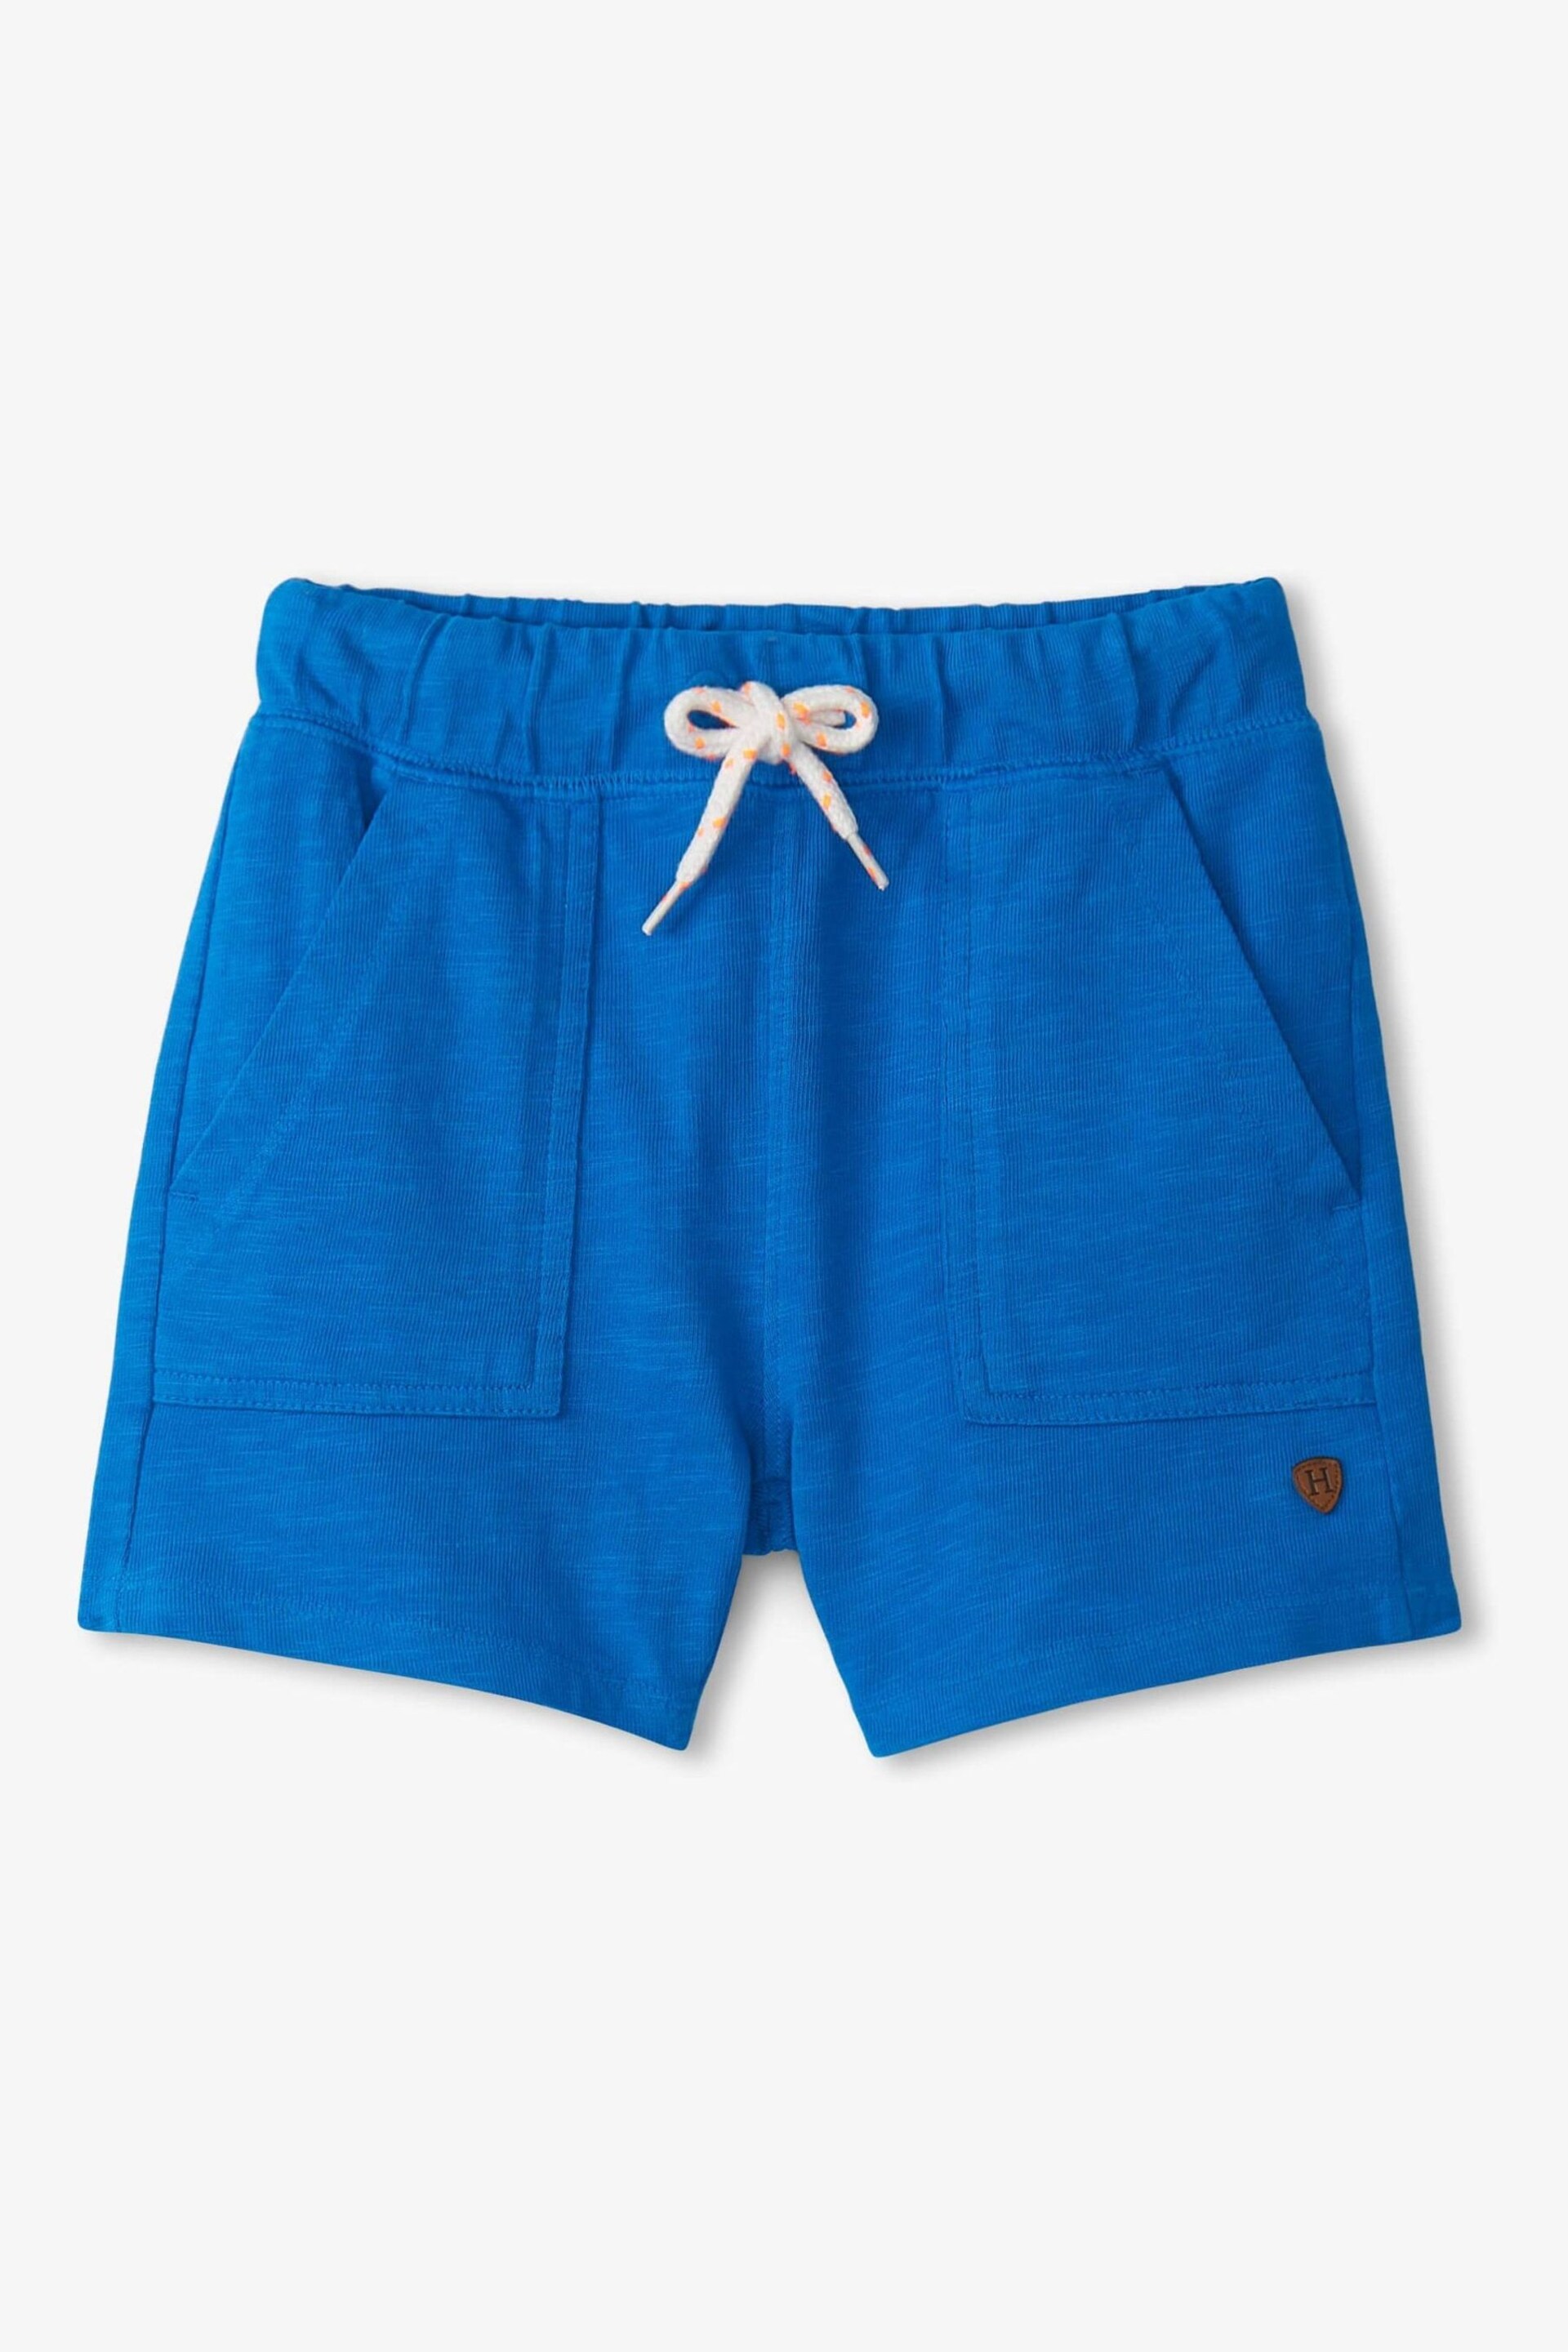 Hatley Jersey Relaxed Shorts - Image 1 of 6